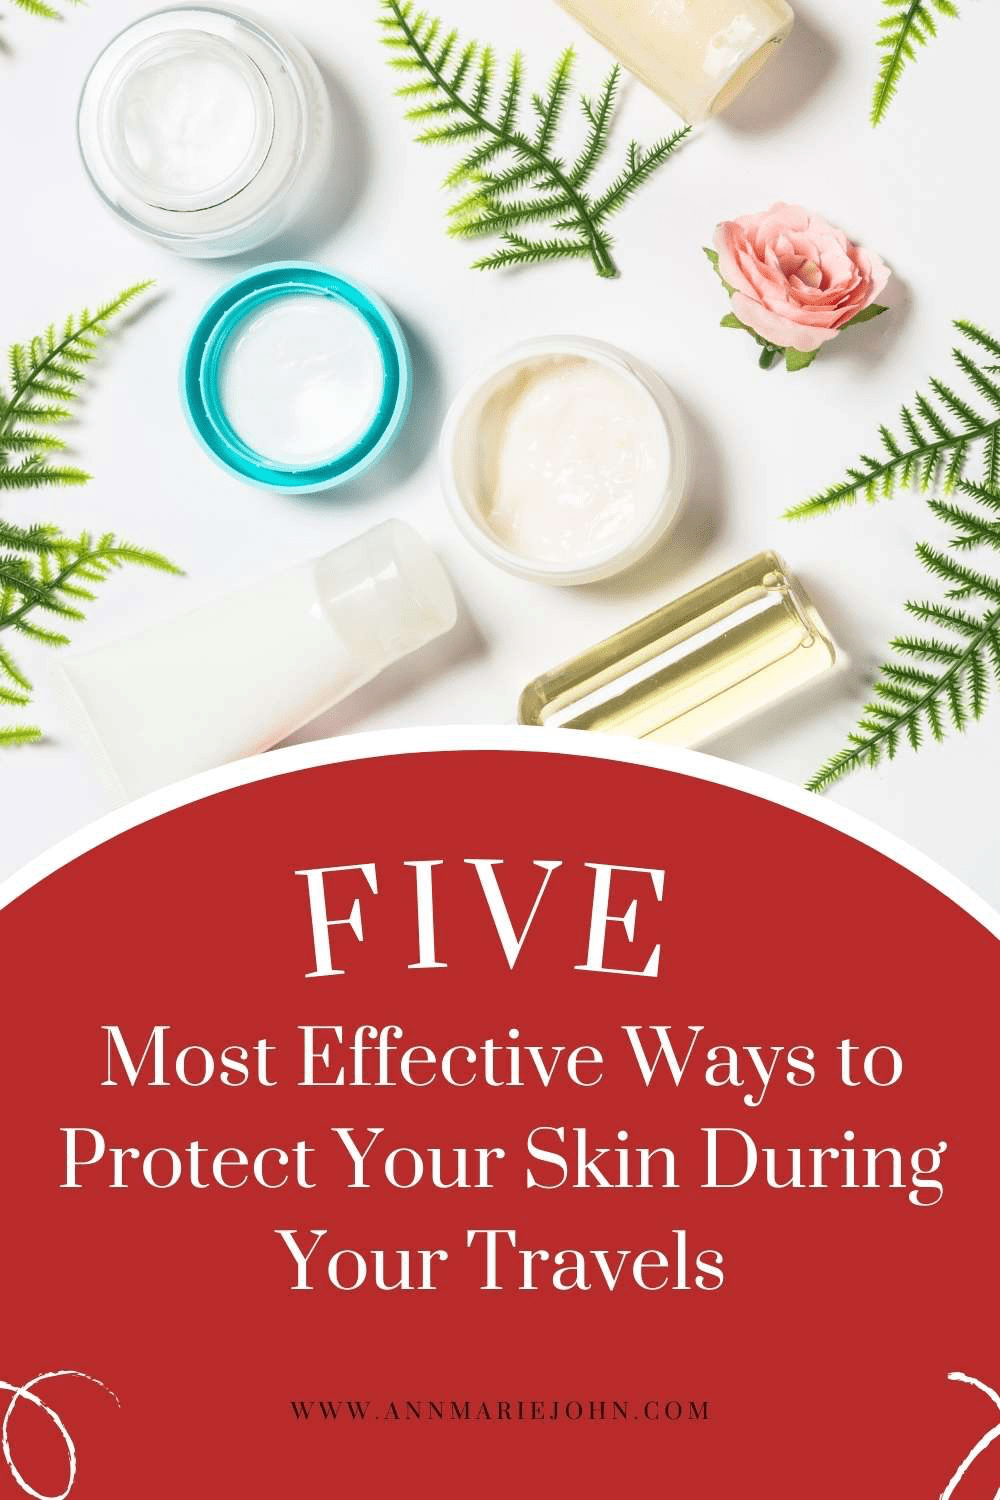 Most Effective Ways to Protect Your Skin During Your Travels